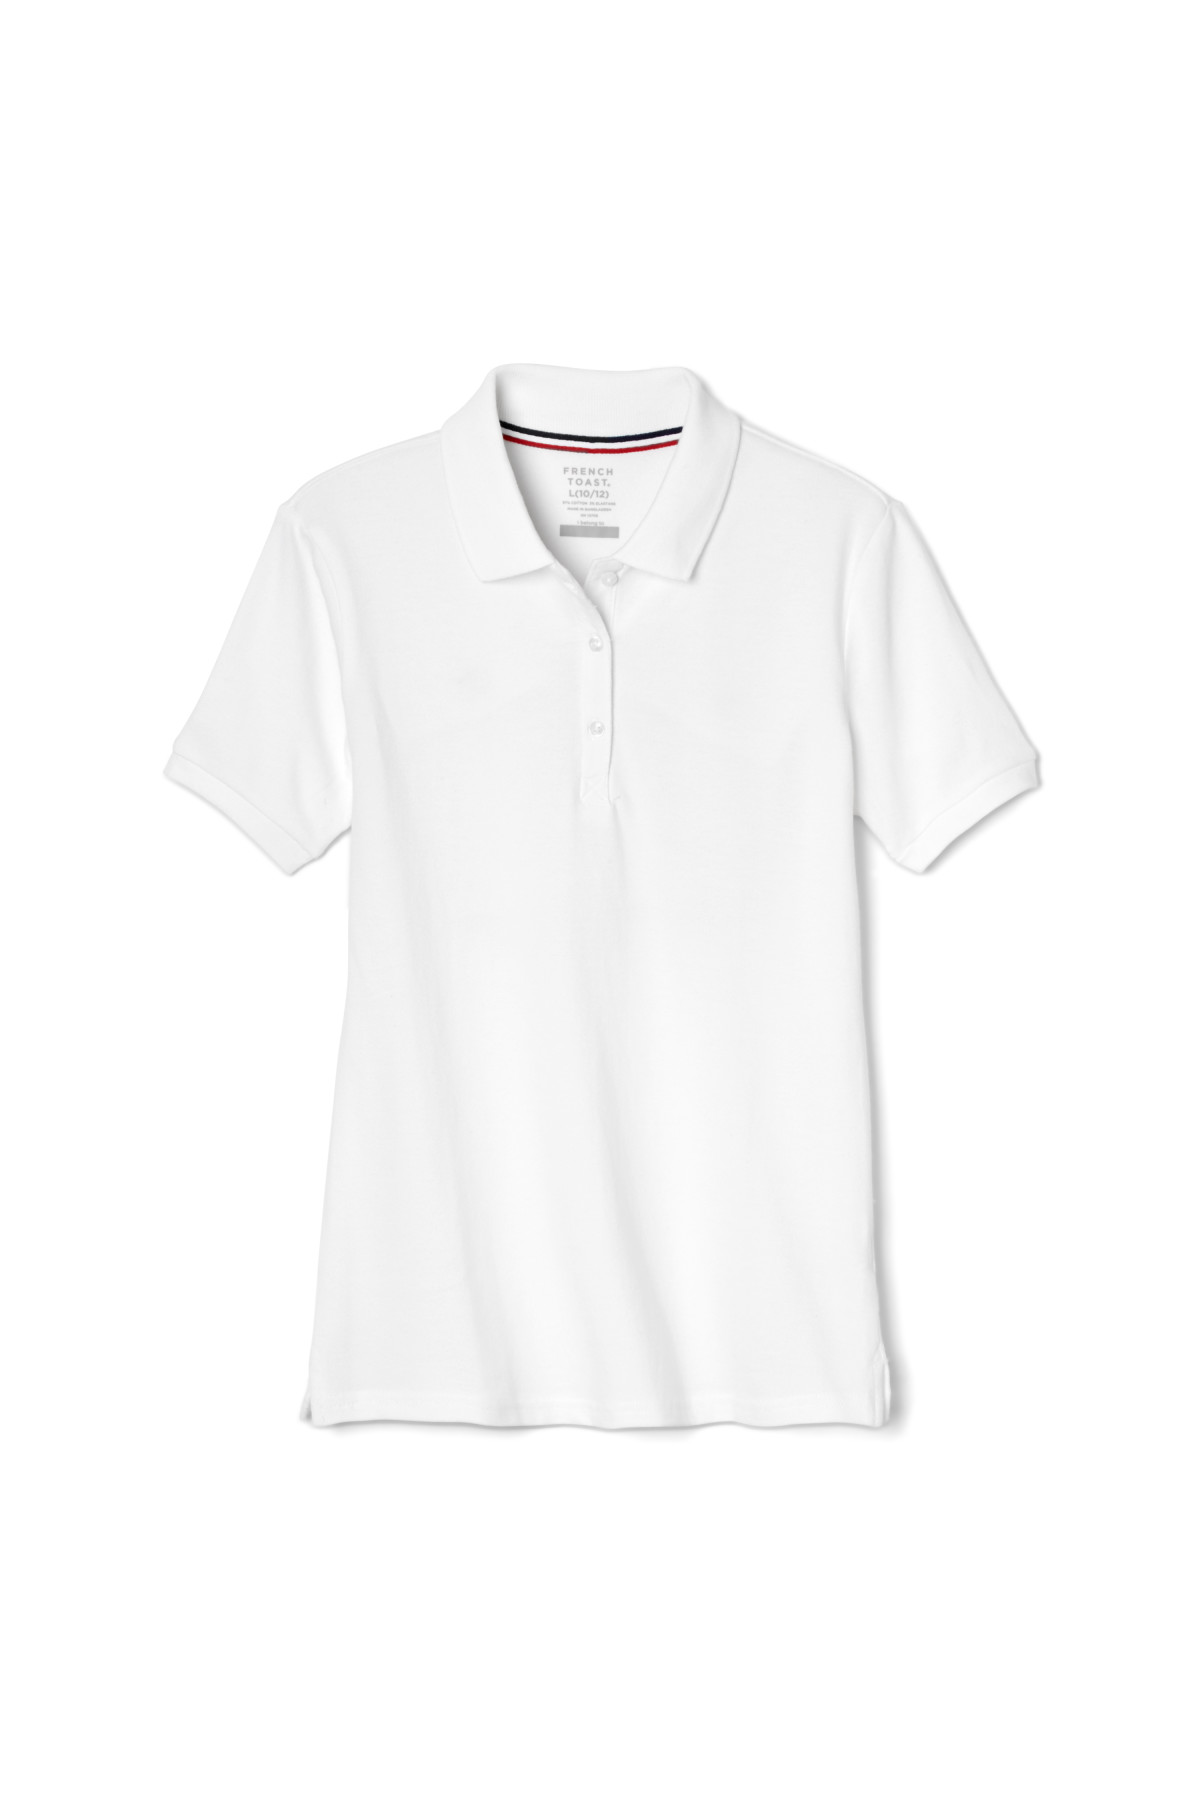 French Toast Girls' Short Sleeve Stretch Pique Polo 